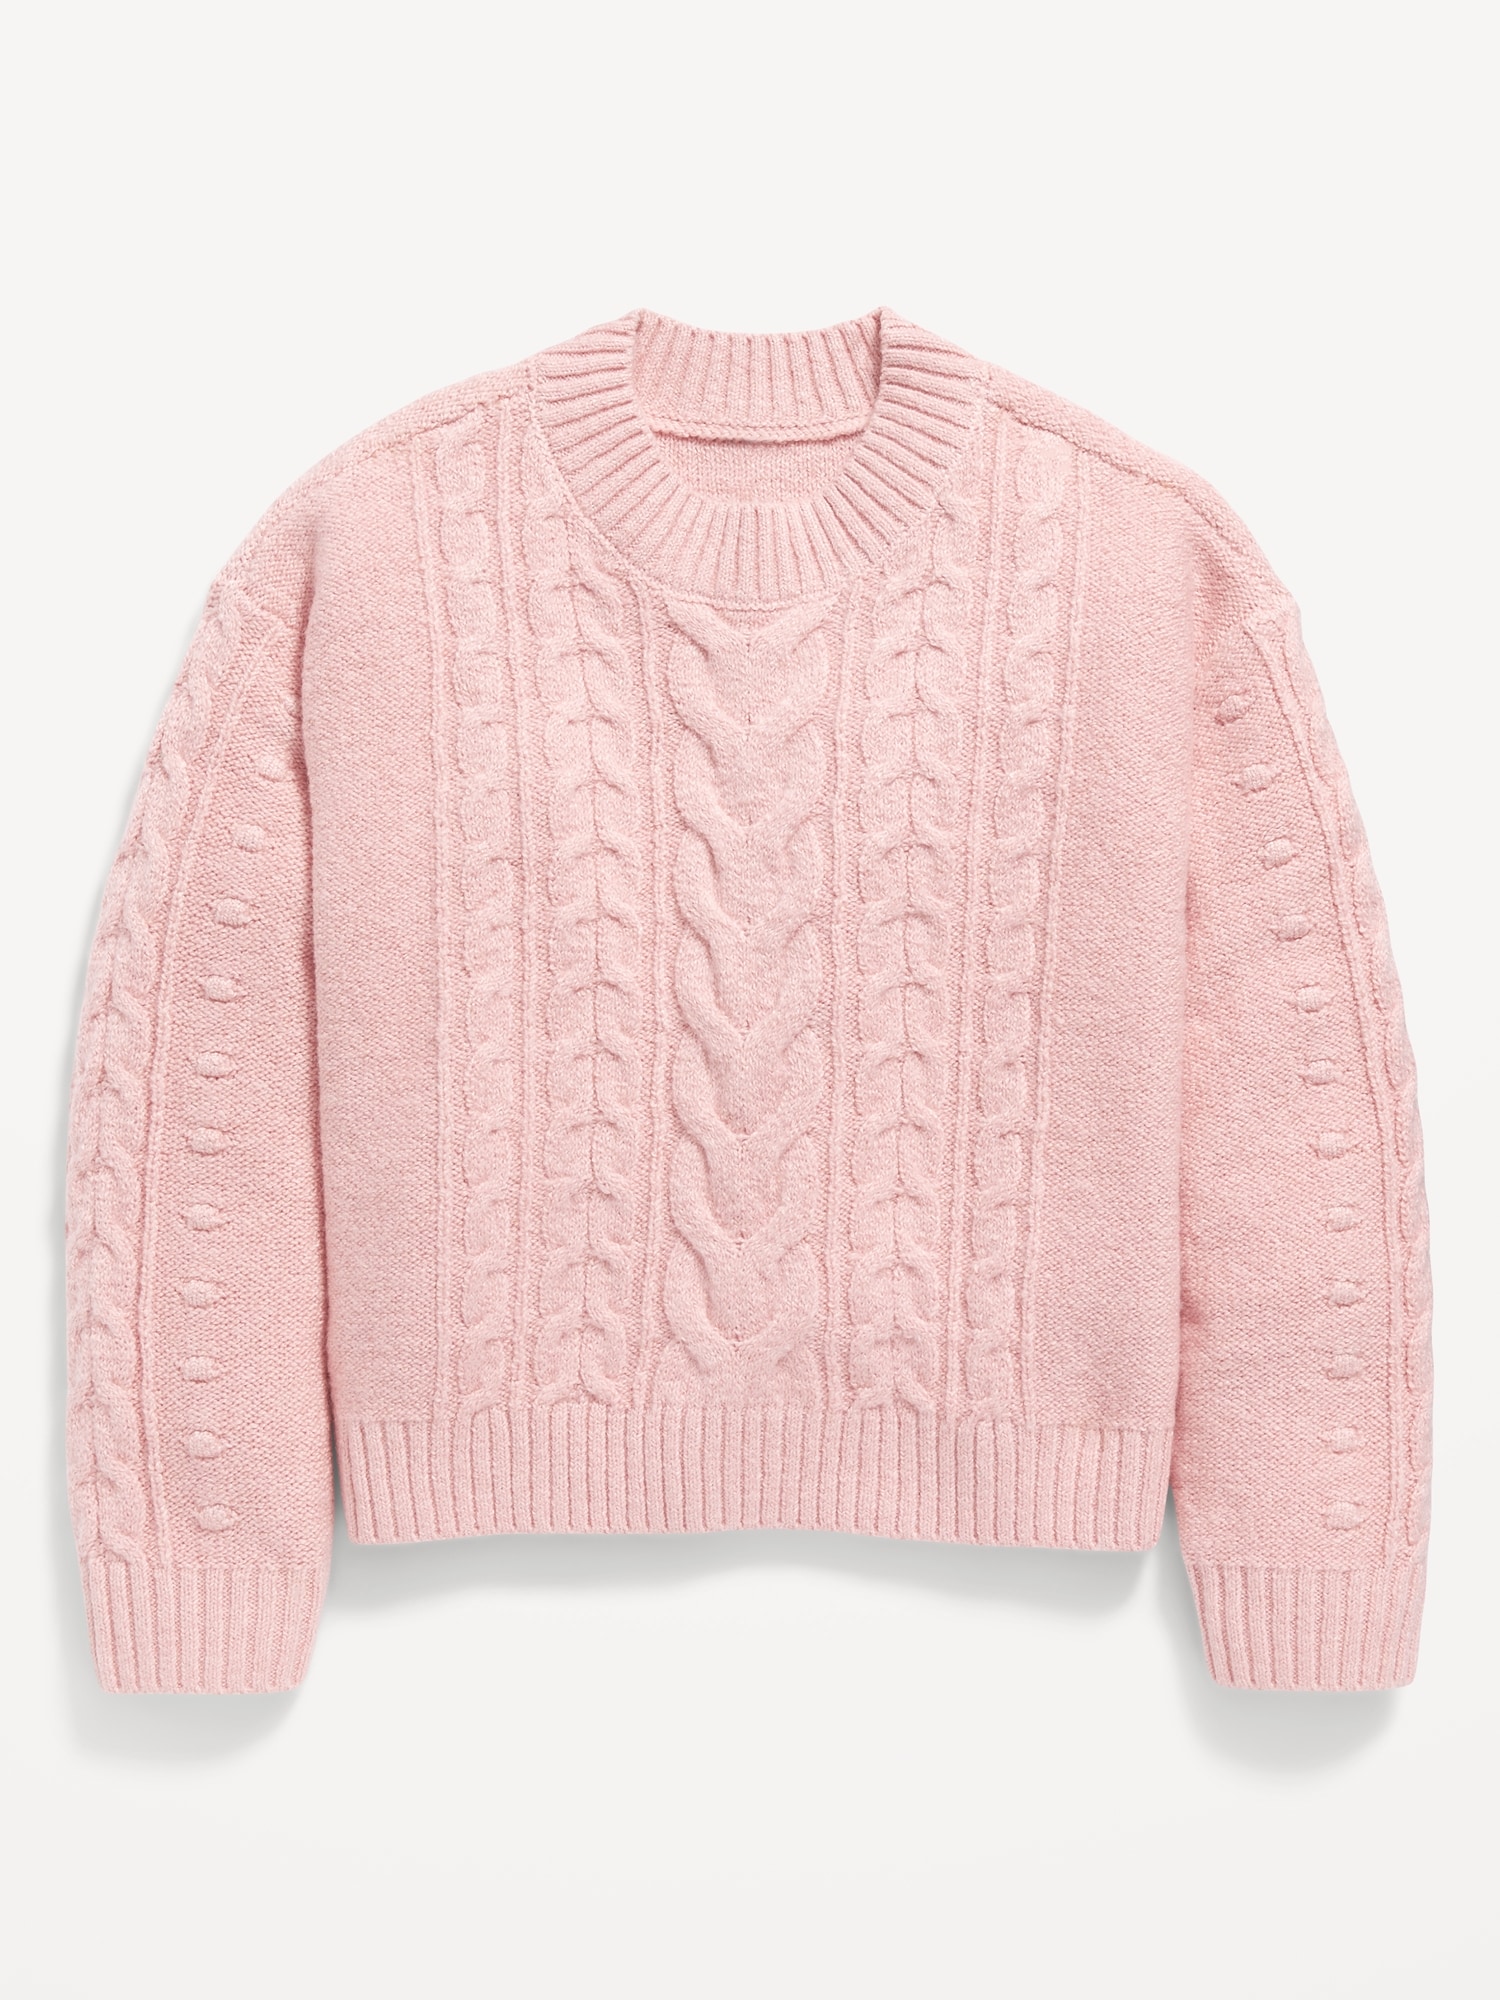 Old Navy Cozy Cable-Knit Mock-Neck Sweater for Girls pink. 1